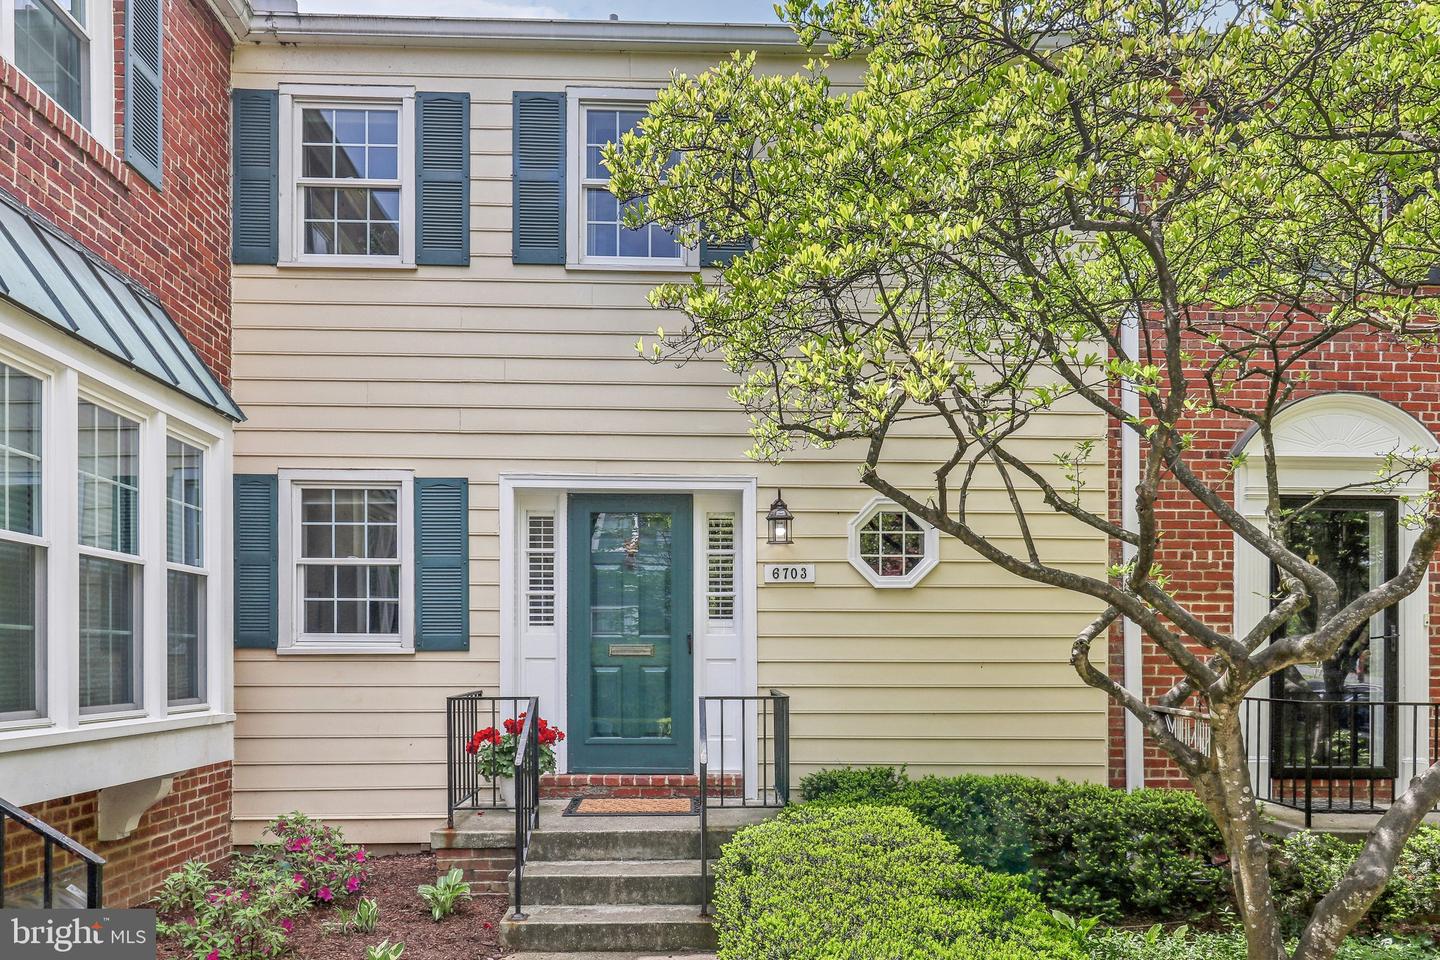 View Chevy Chase, MD 20815 townhome